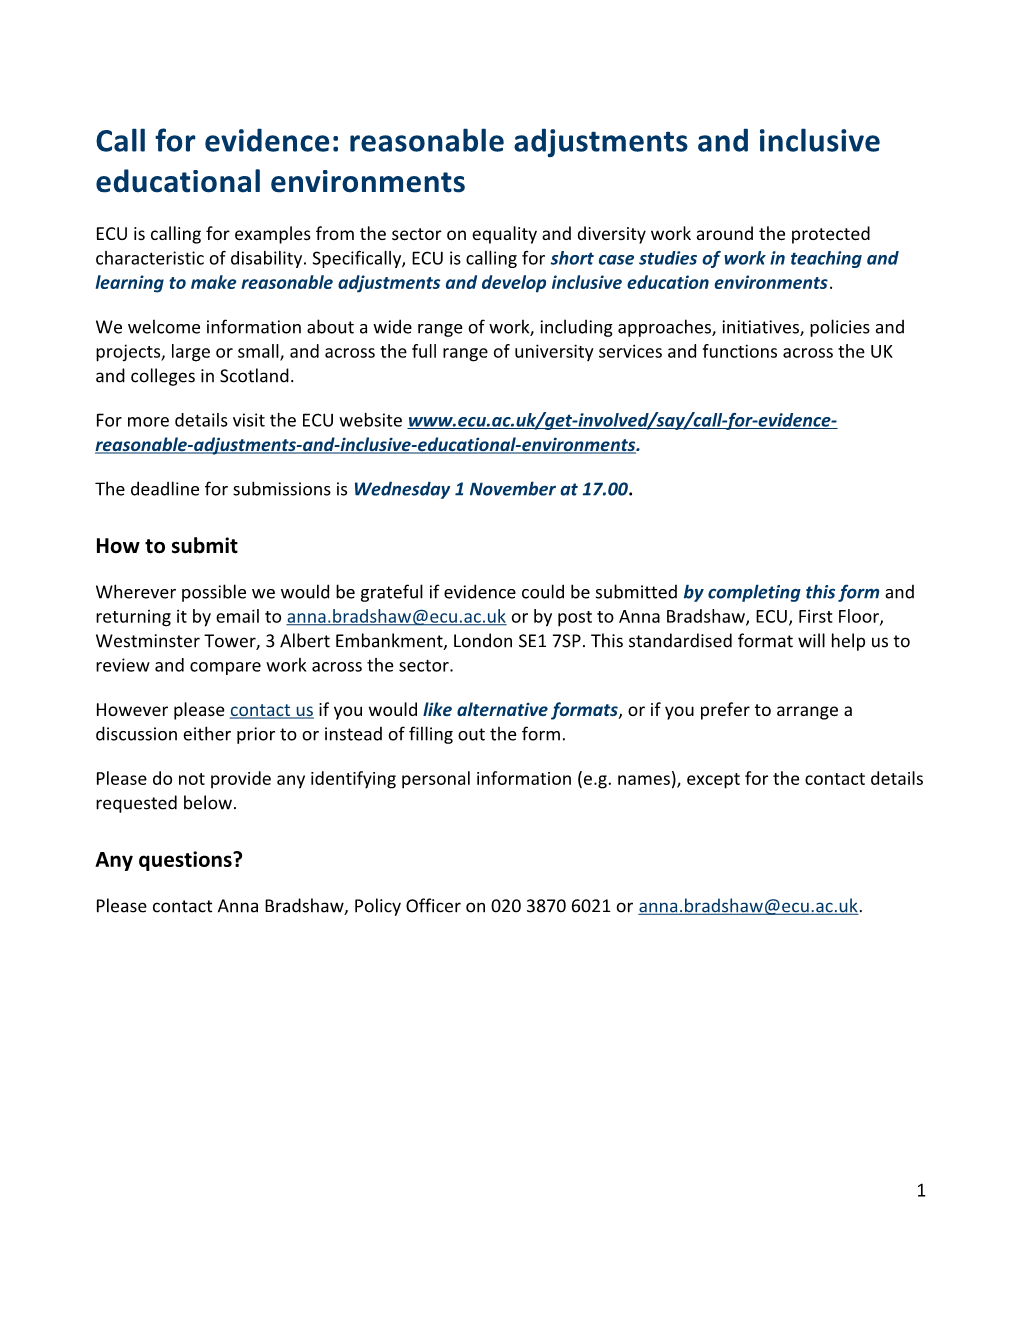 Call for Evidence: Reasonable Adjustments and Inclusive Educational Environments